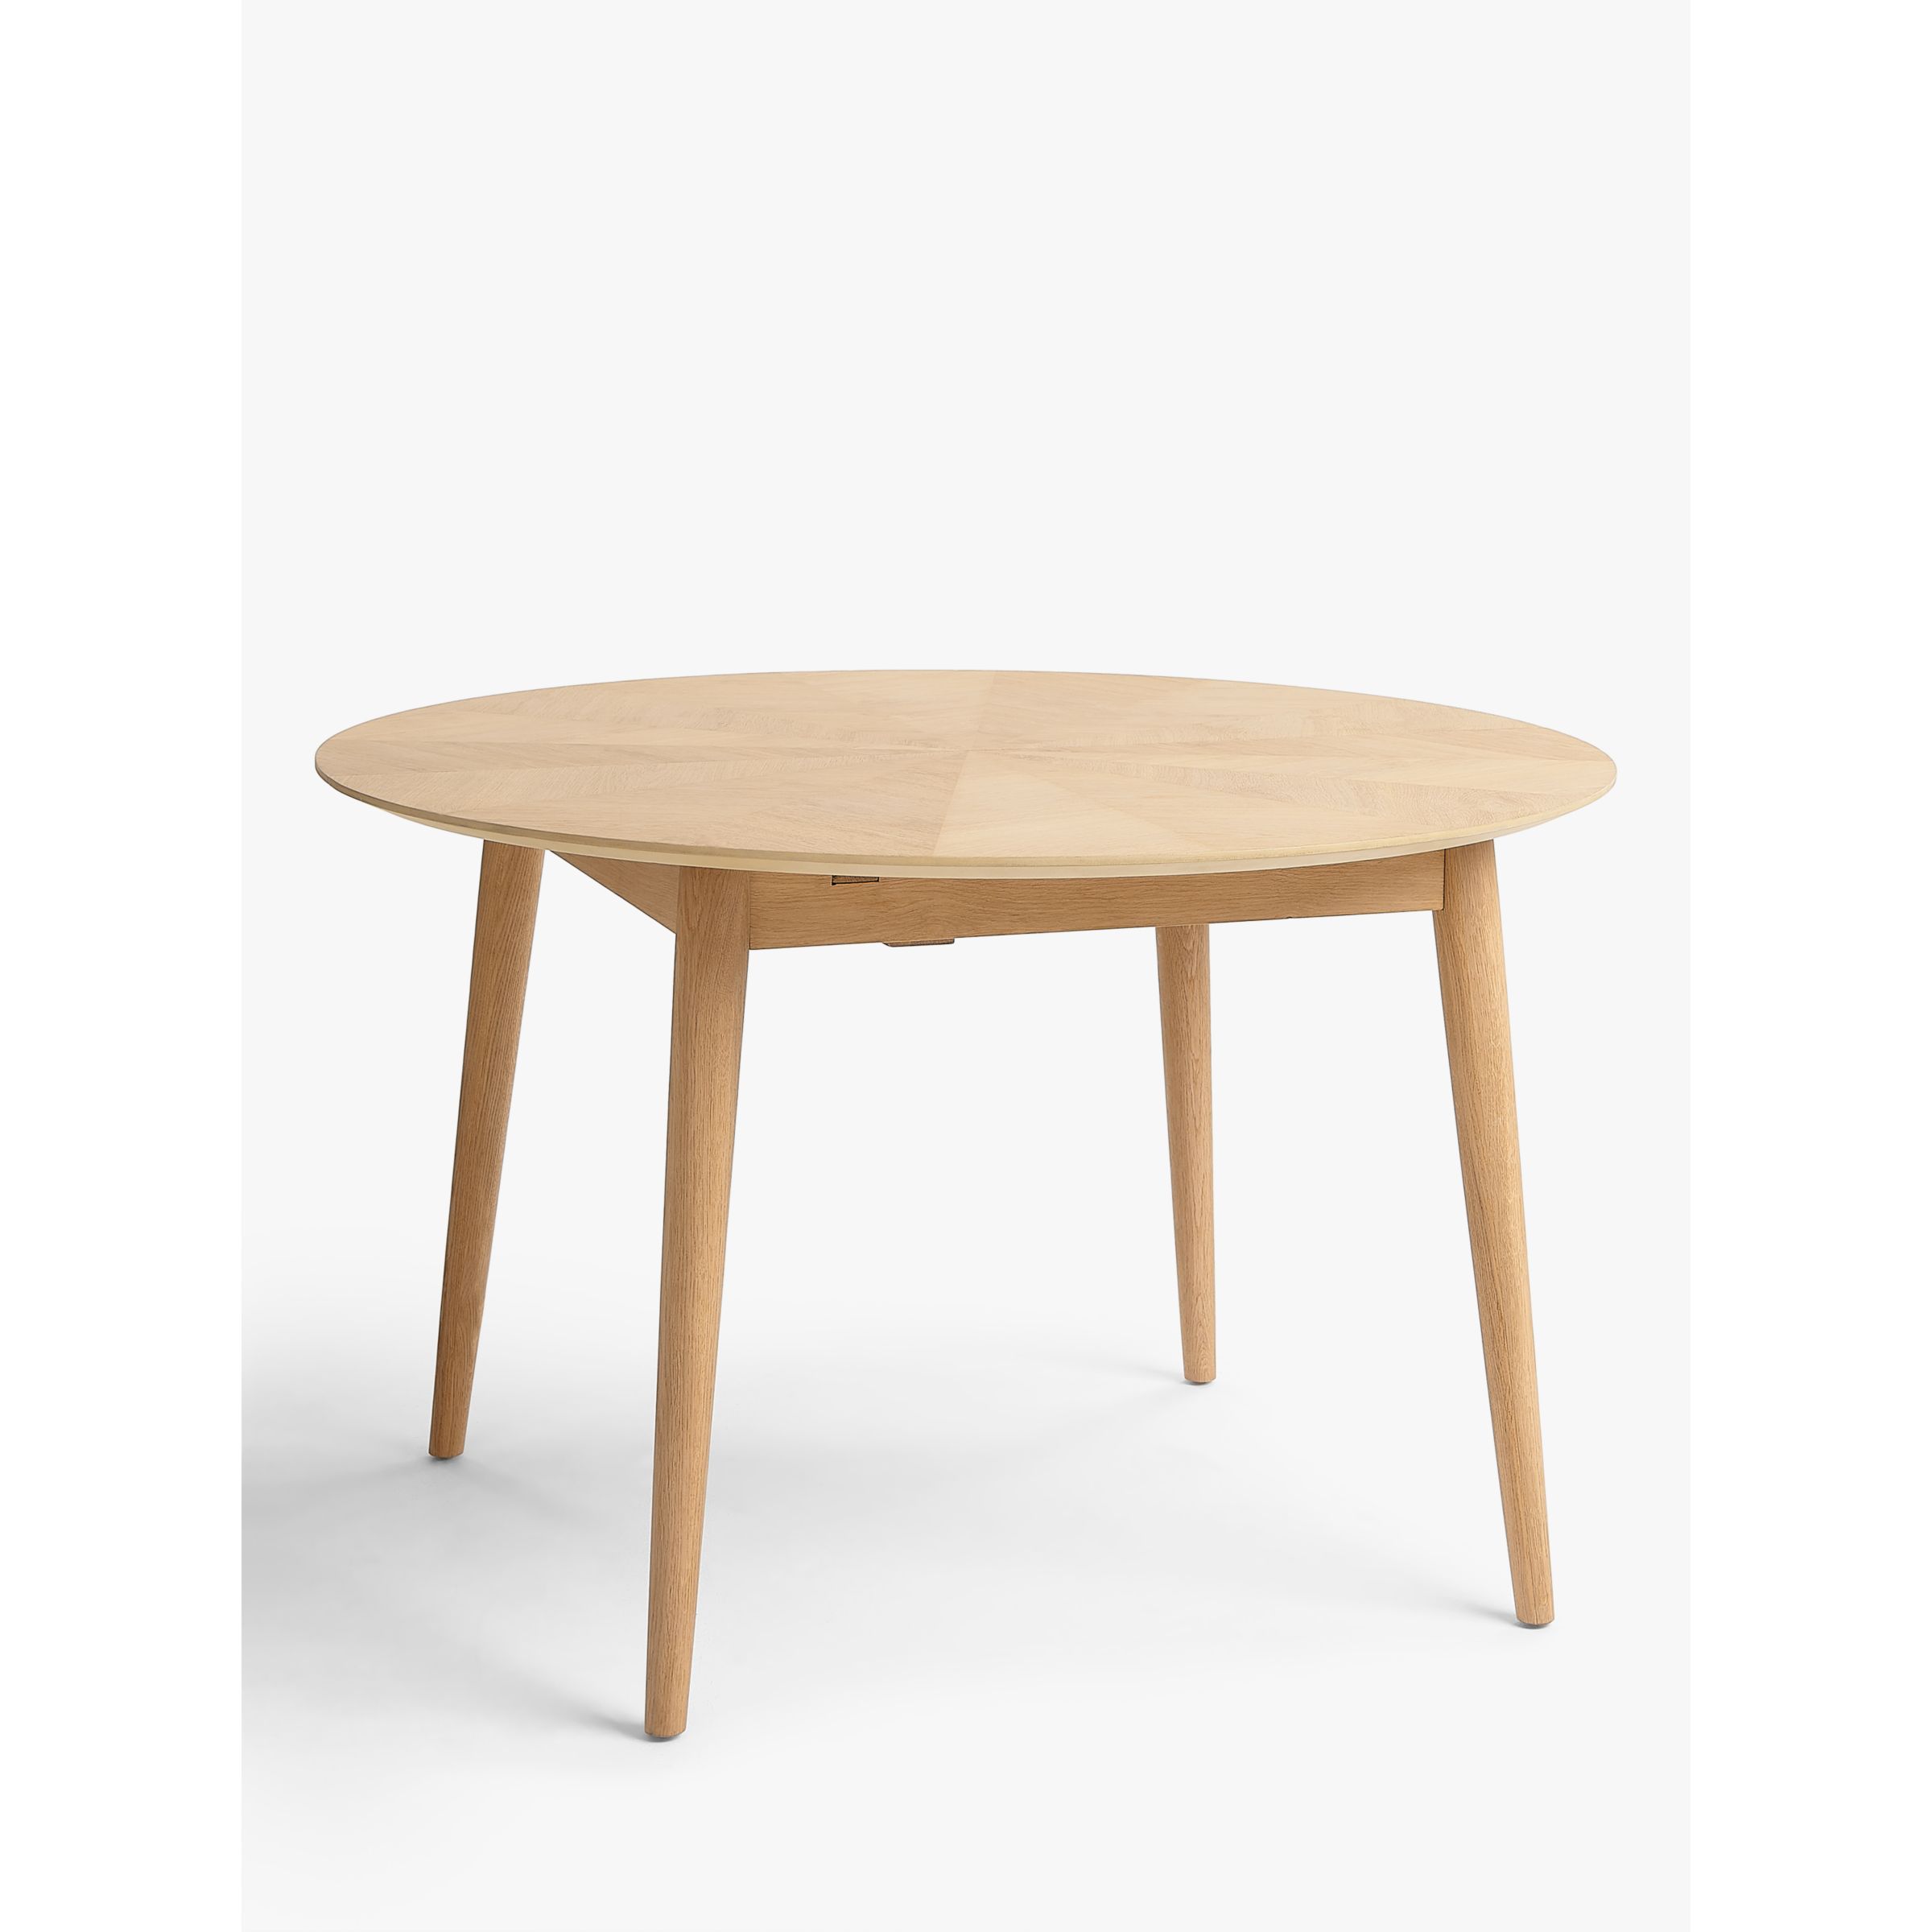 John Lewis Iona 4-6 Seater Extending Round Dining Table, Oak